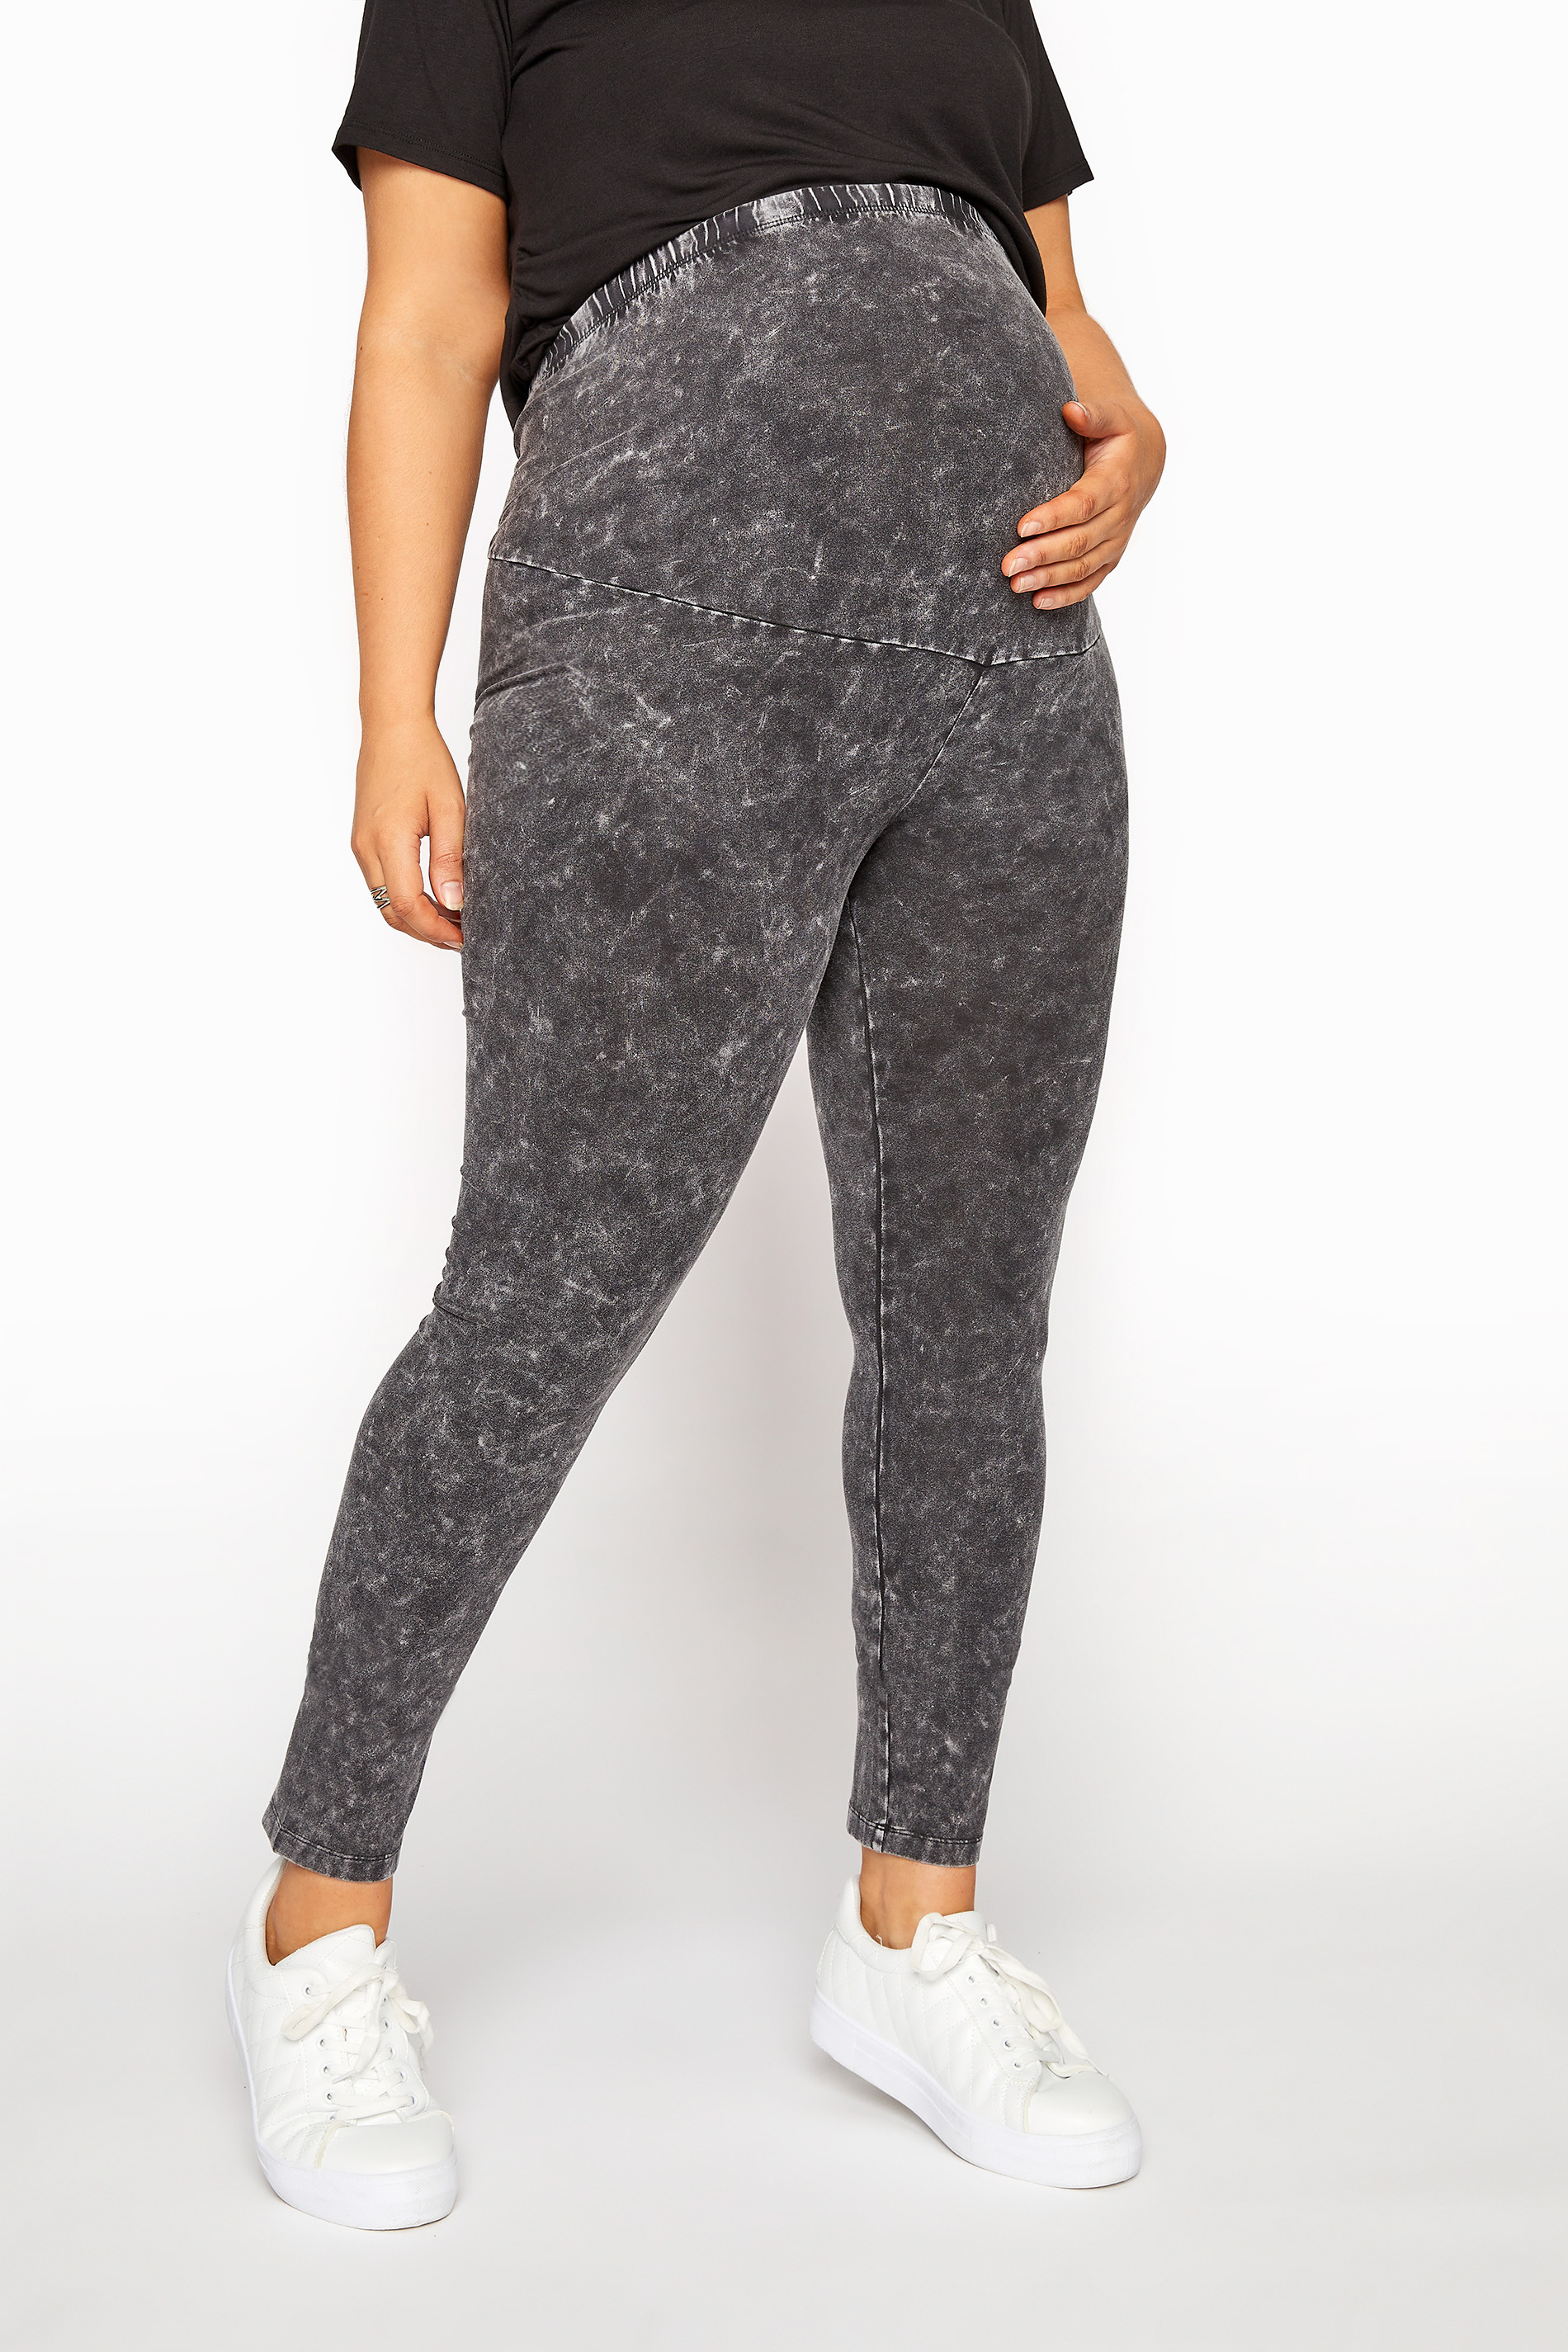 Plus Size BUMP IT UP MATERNITY Black Acid Wash Leggings With Comfort Panel | Yours Clothing 2